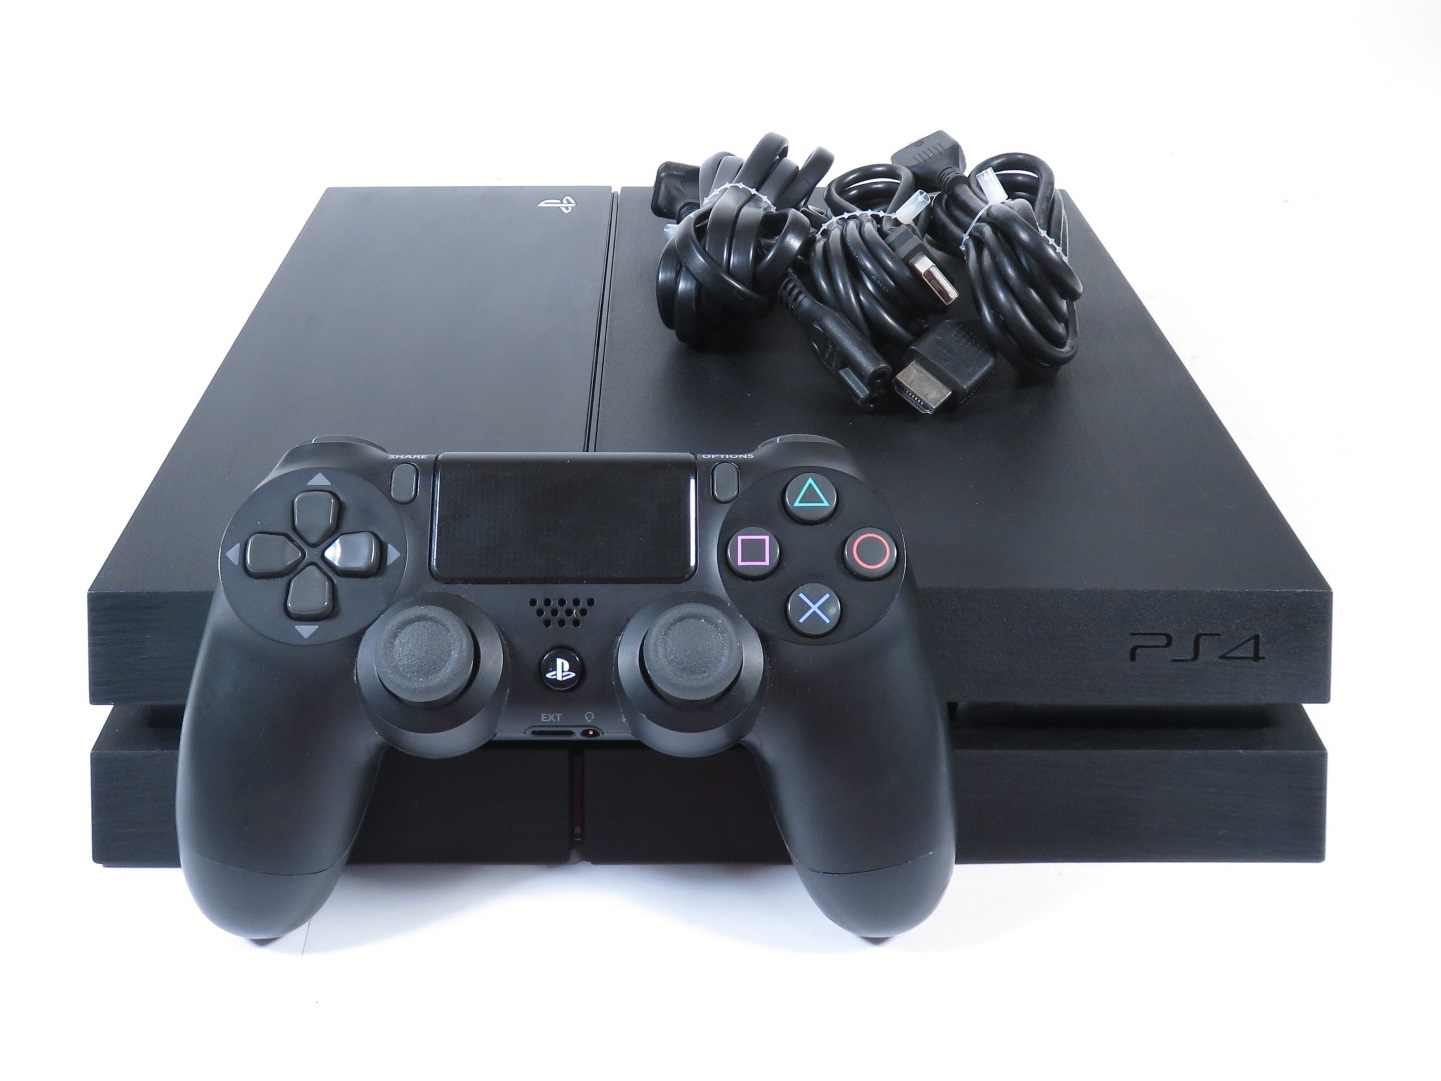 Sony PlayStation 4 CUH-1115A 500GB Black Original Home Video Game Console  7902